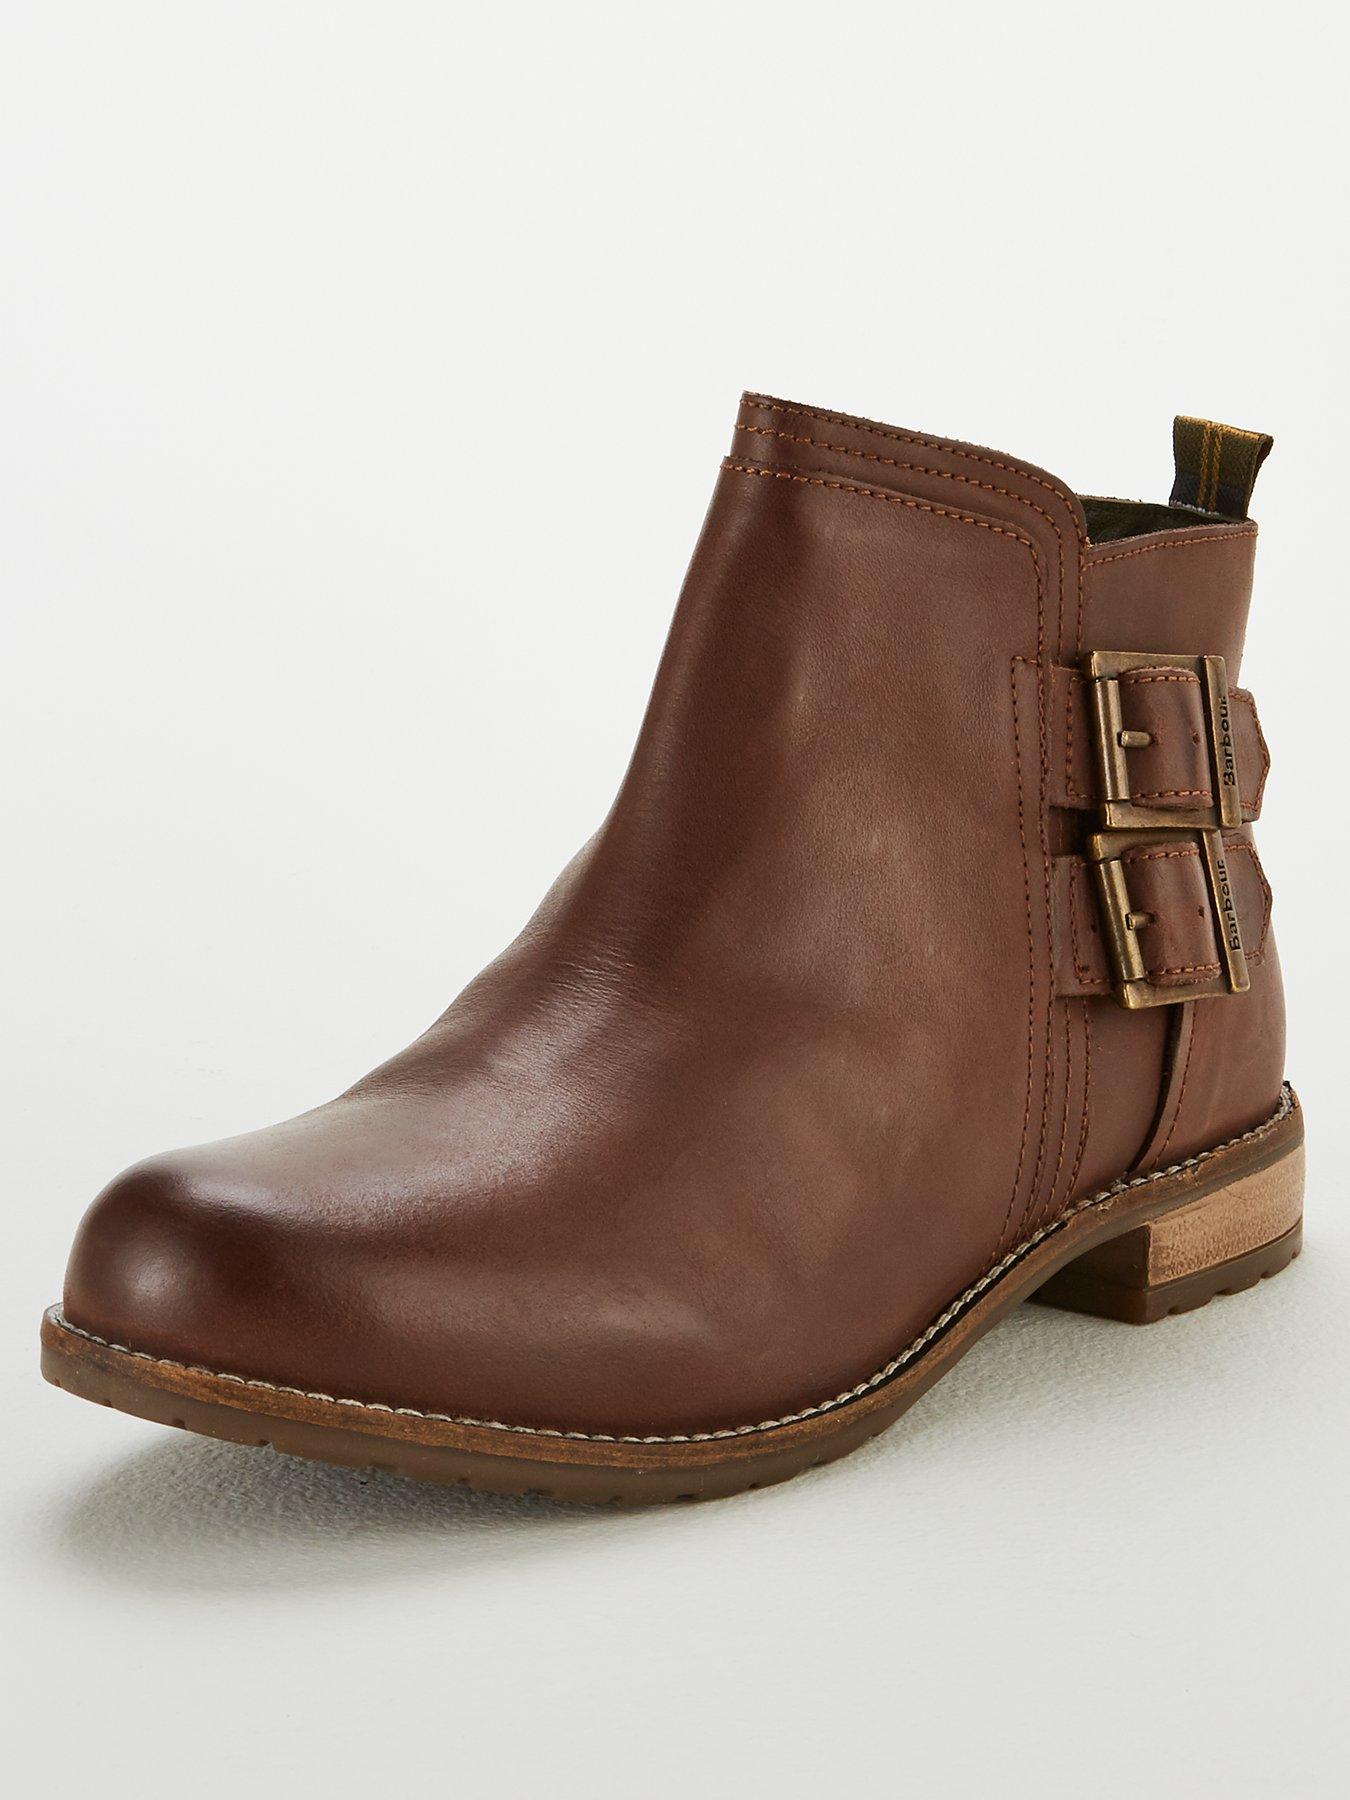 barbour buckle boots